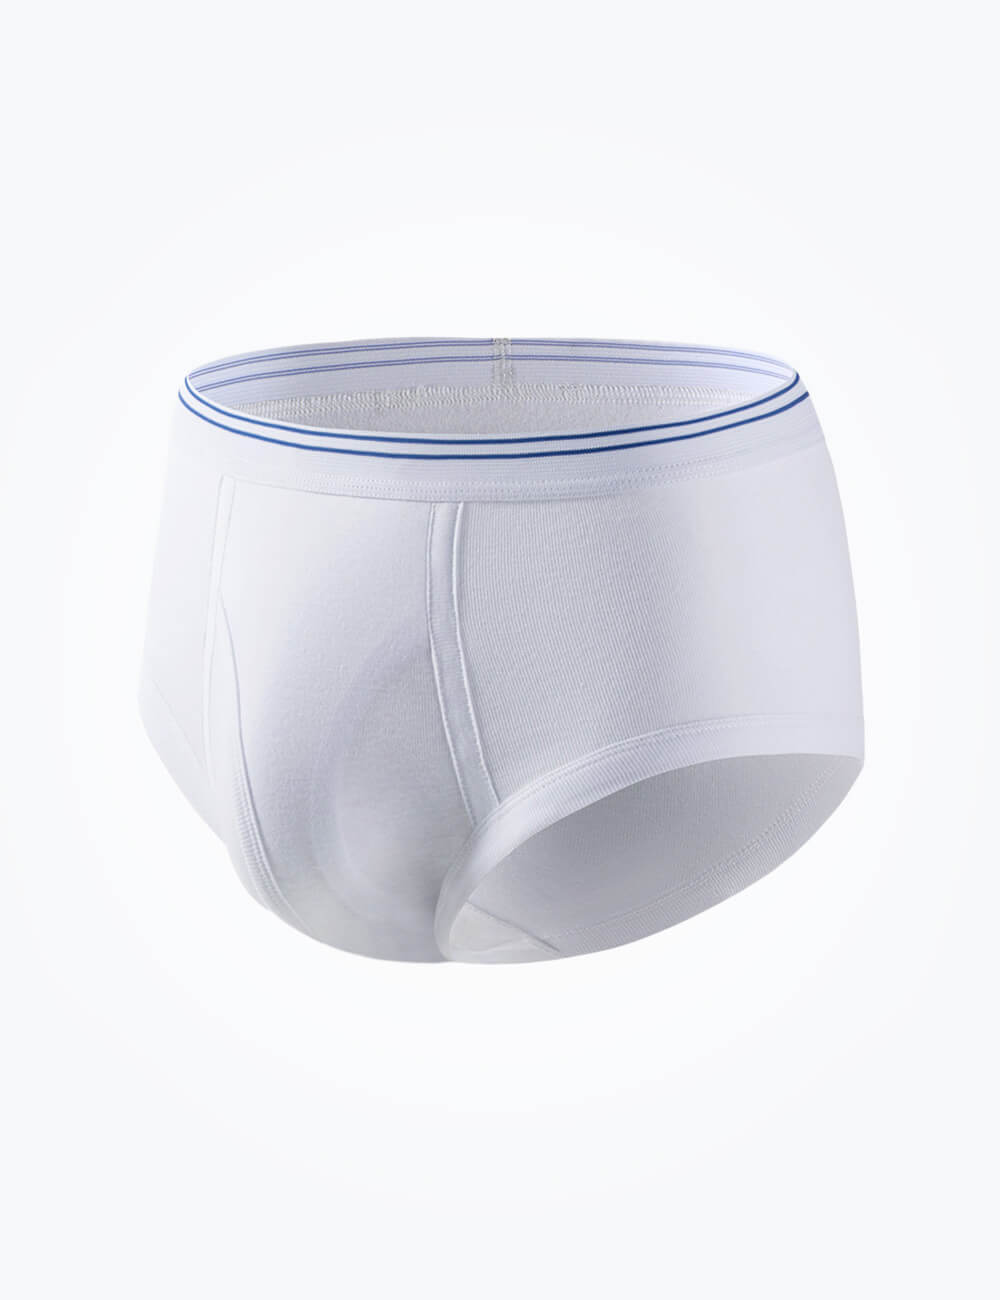  Petey's Washable Incontinence Underwear for Men (Super  Protection) - Reusable Men's Briefs for Moderate to Heavy Leakage (X-Small)  : Health & Household